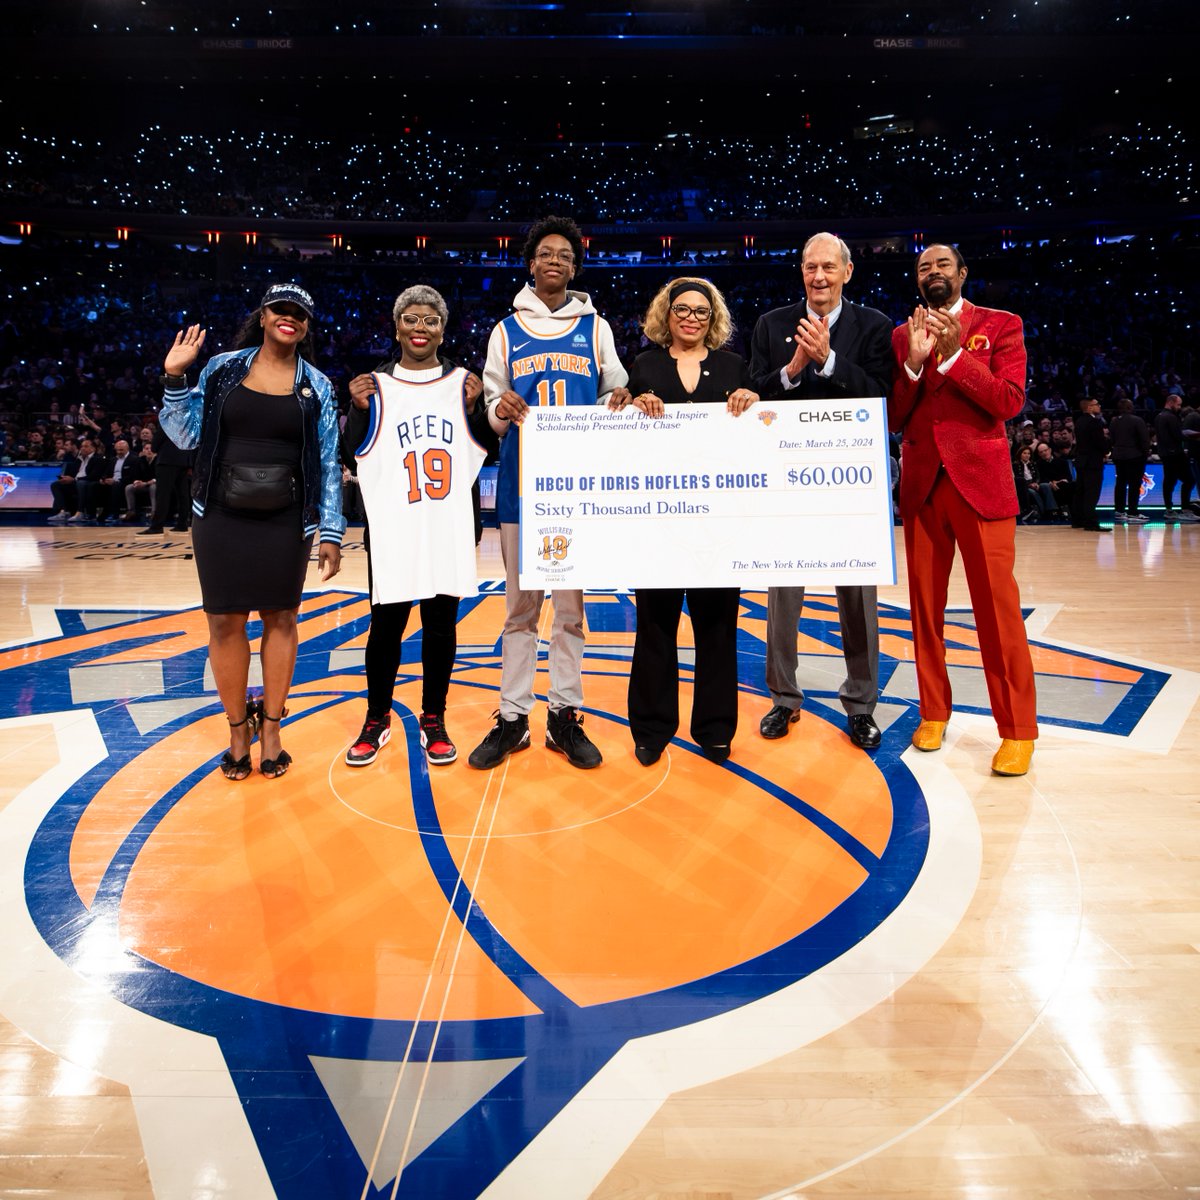 On Monday, young person Idris was awarded the first-ever Willis Reed GDF Inspire Scholarship on court at @nyknicks #HBCUNight! It supports Idris's HBCU education and was presented by @Chase, Assemblywoman #TaylorDarling, Willis Reed's wife #Gale, and #NYK legend #ClydeFrazier.